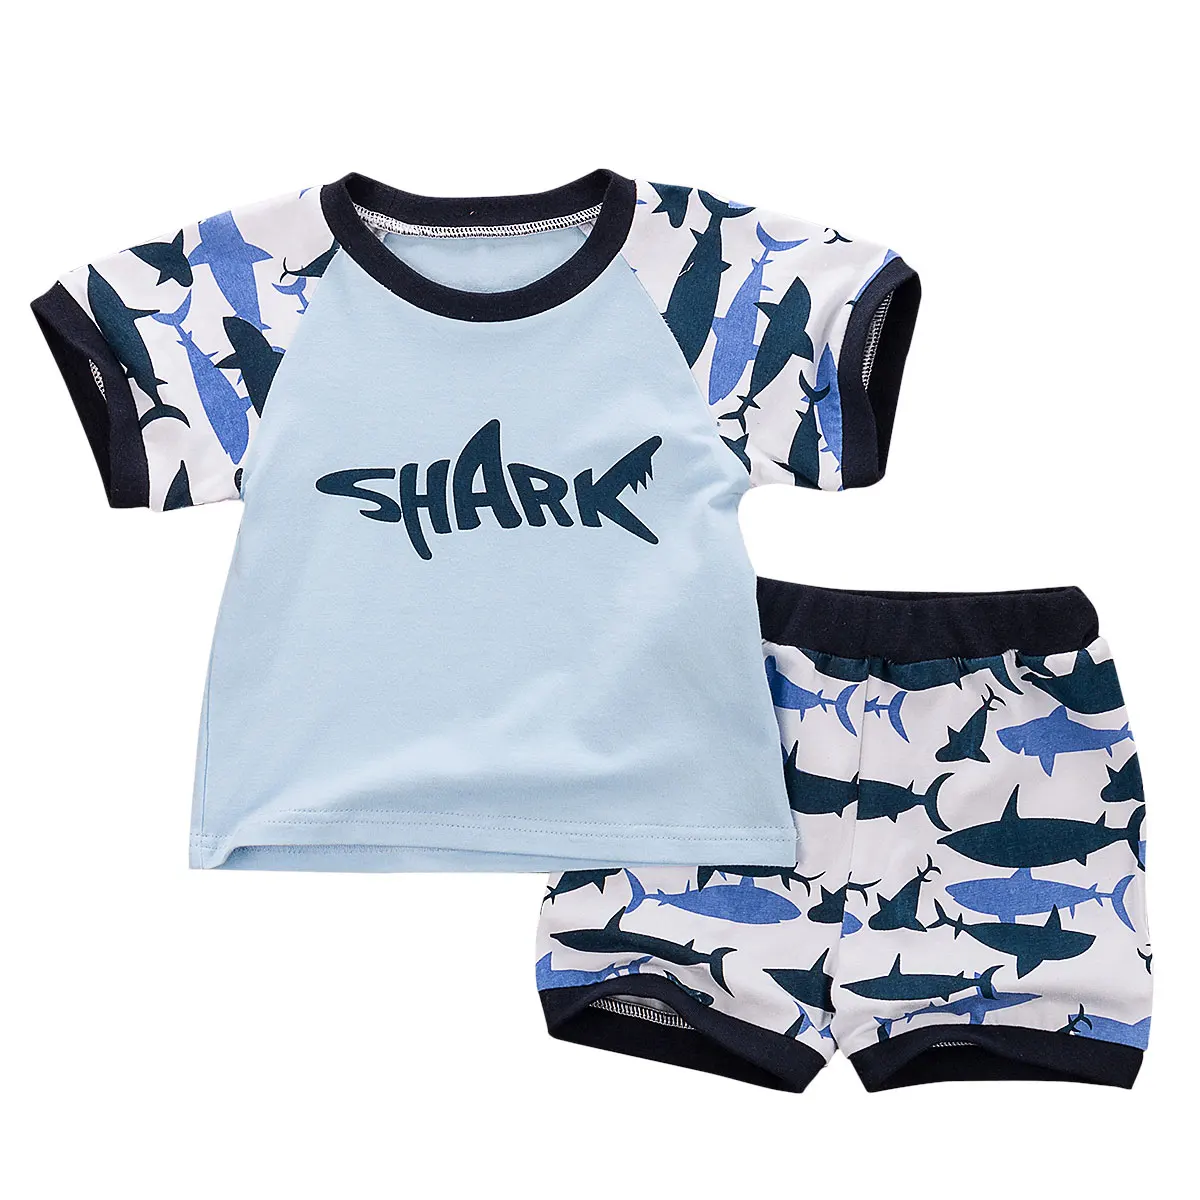 Kid Toddler Baby Boys Shark Summer Vest T Shirt Top Shorts Pants Outfits Clothes